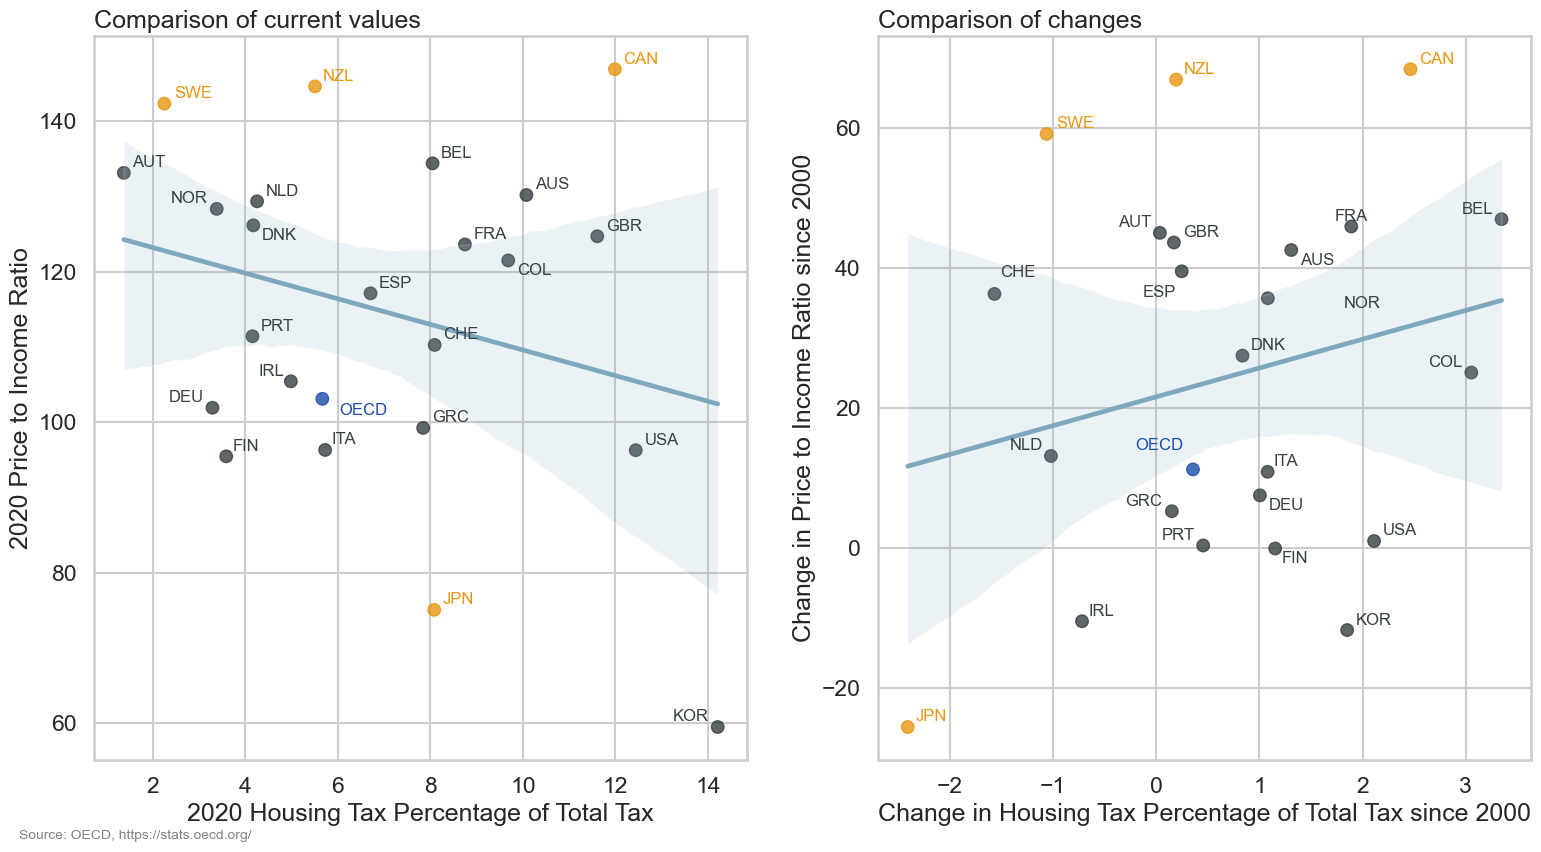 Scatter plot showing the relationship between housing tax as a percentage of total tax and price to income ratio in 2020 and the changes since 2000 for selected OECD countries